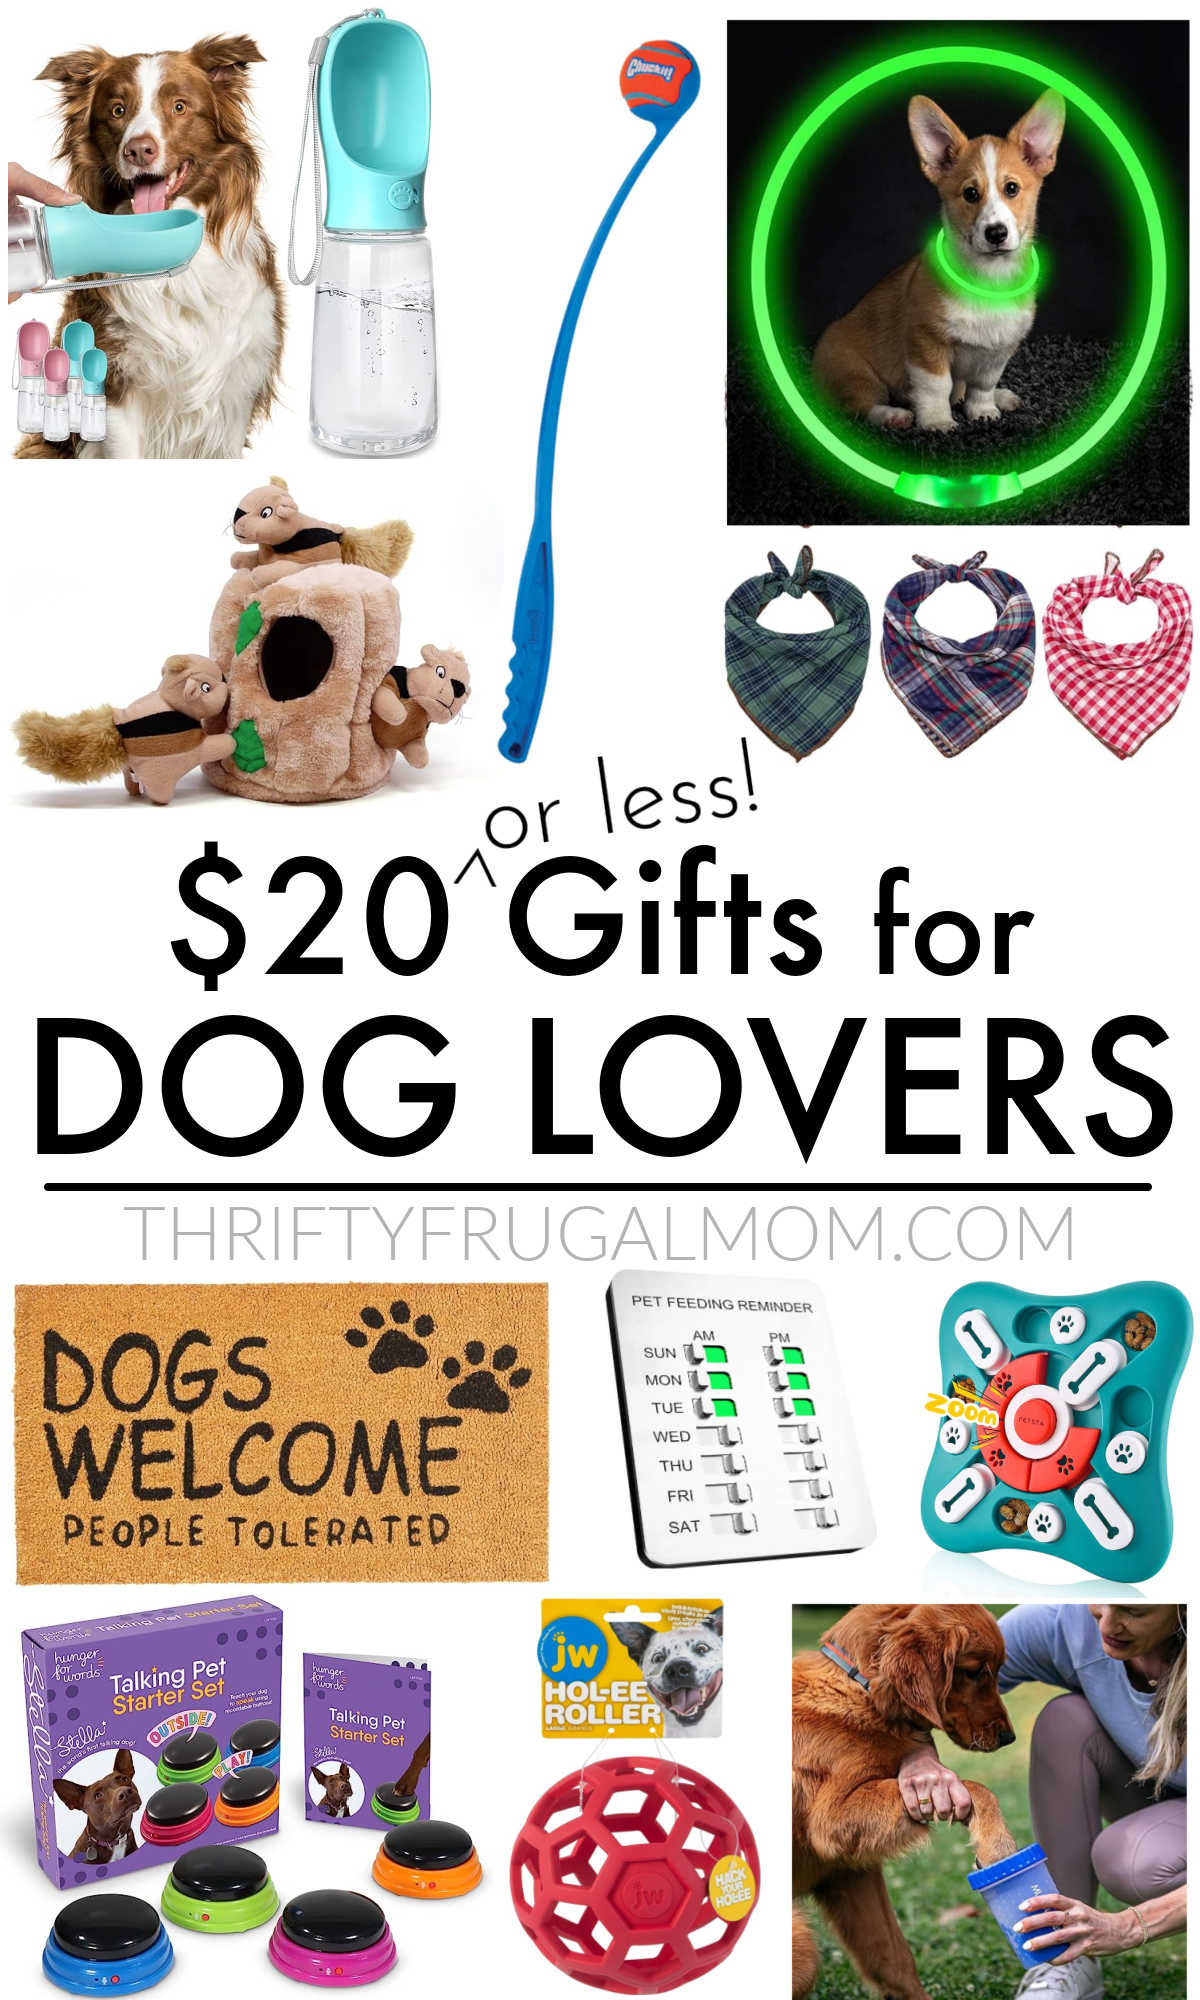 a collage of photos and text showing $20 or less Gifts for Dog Lovers